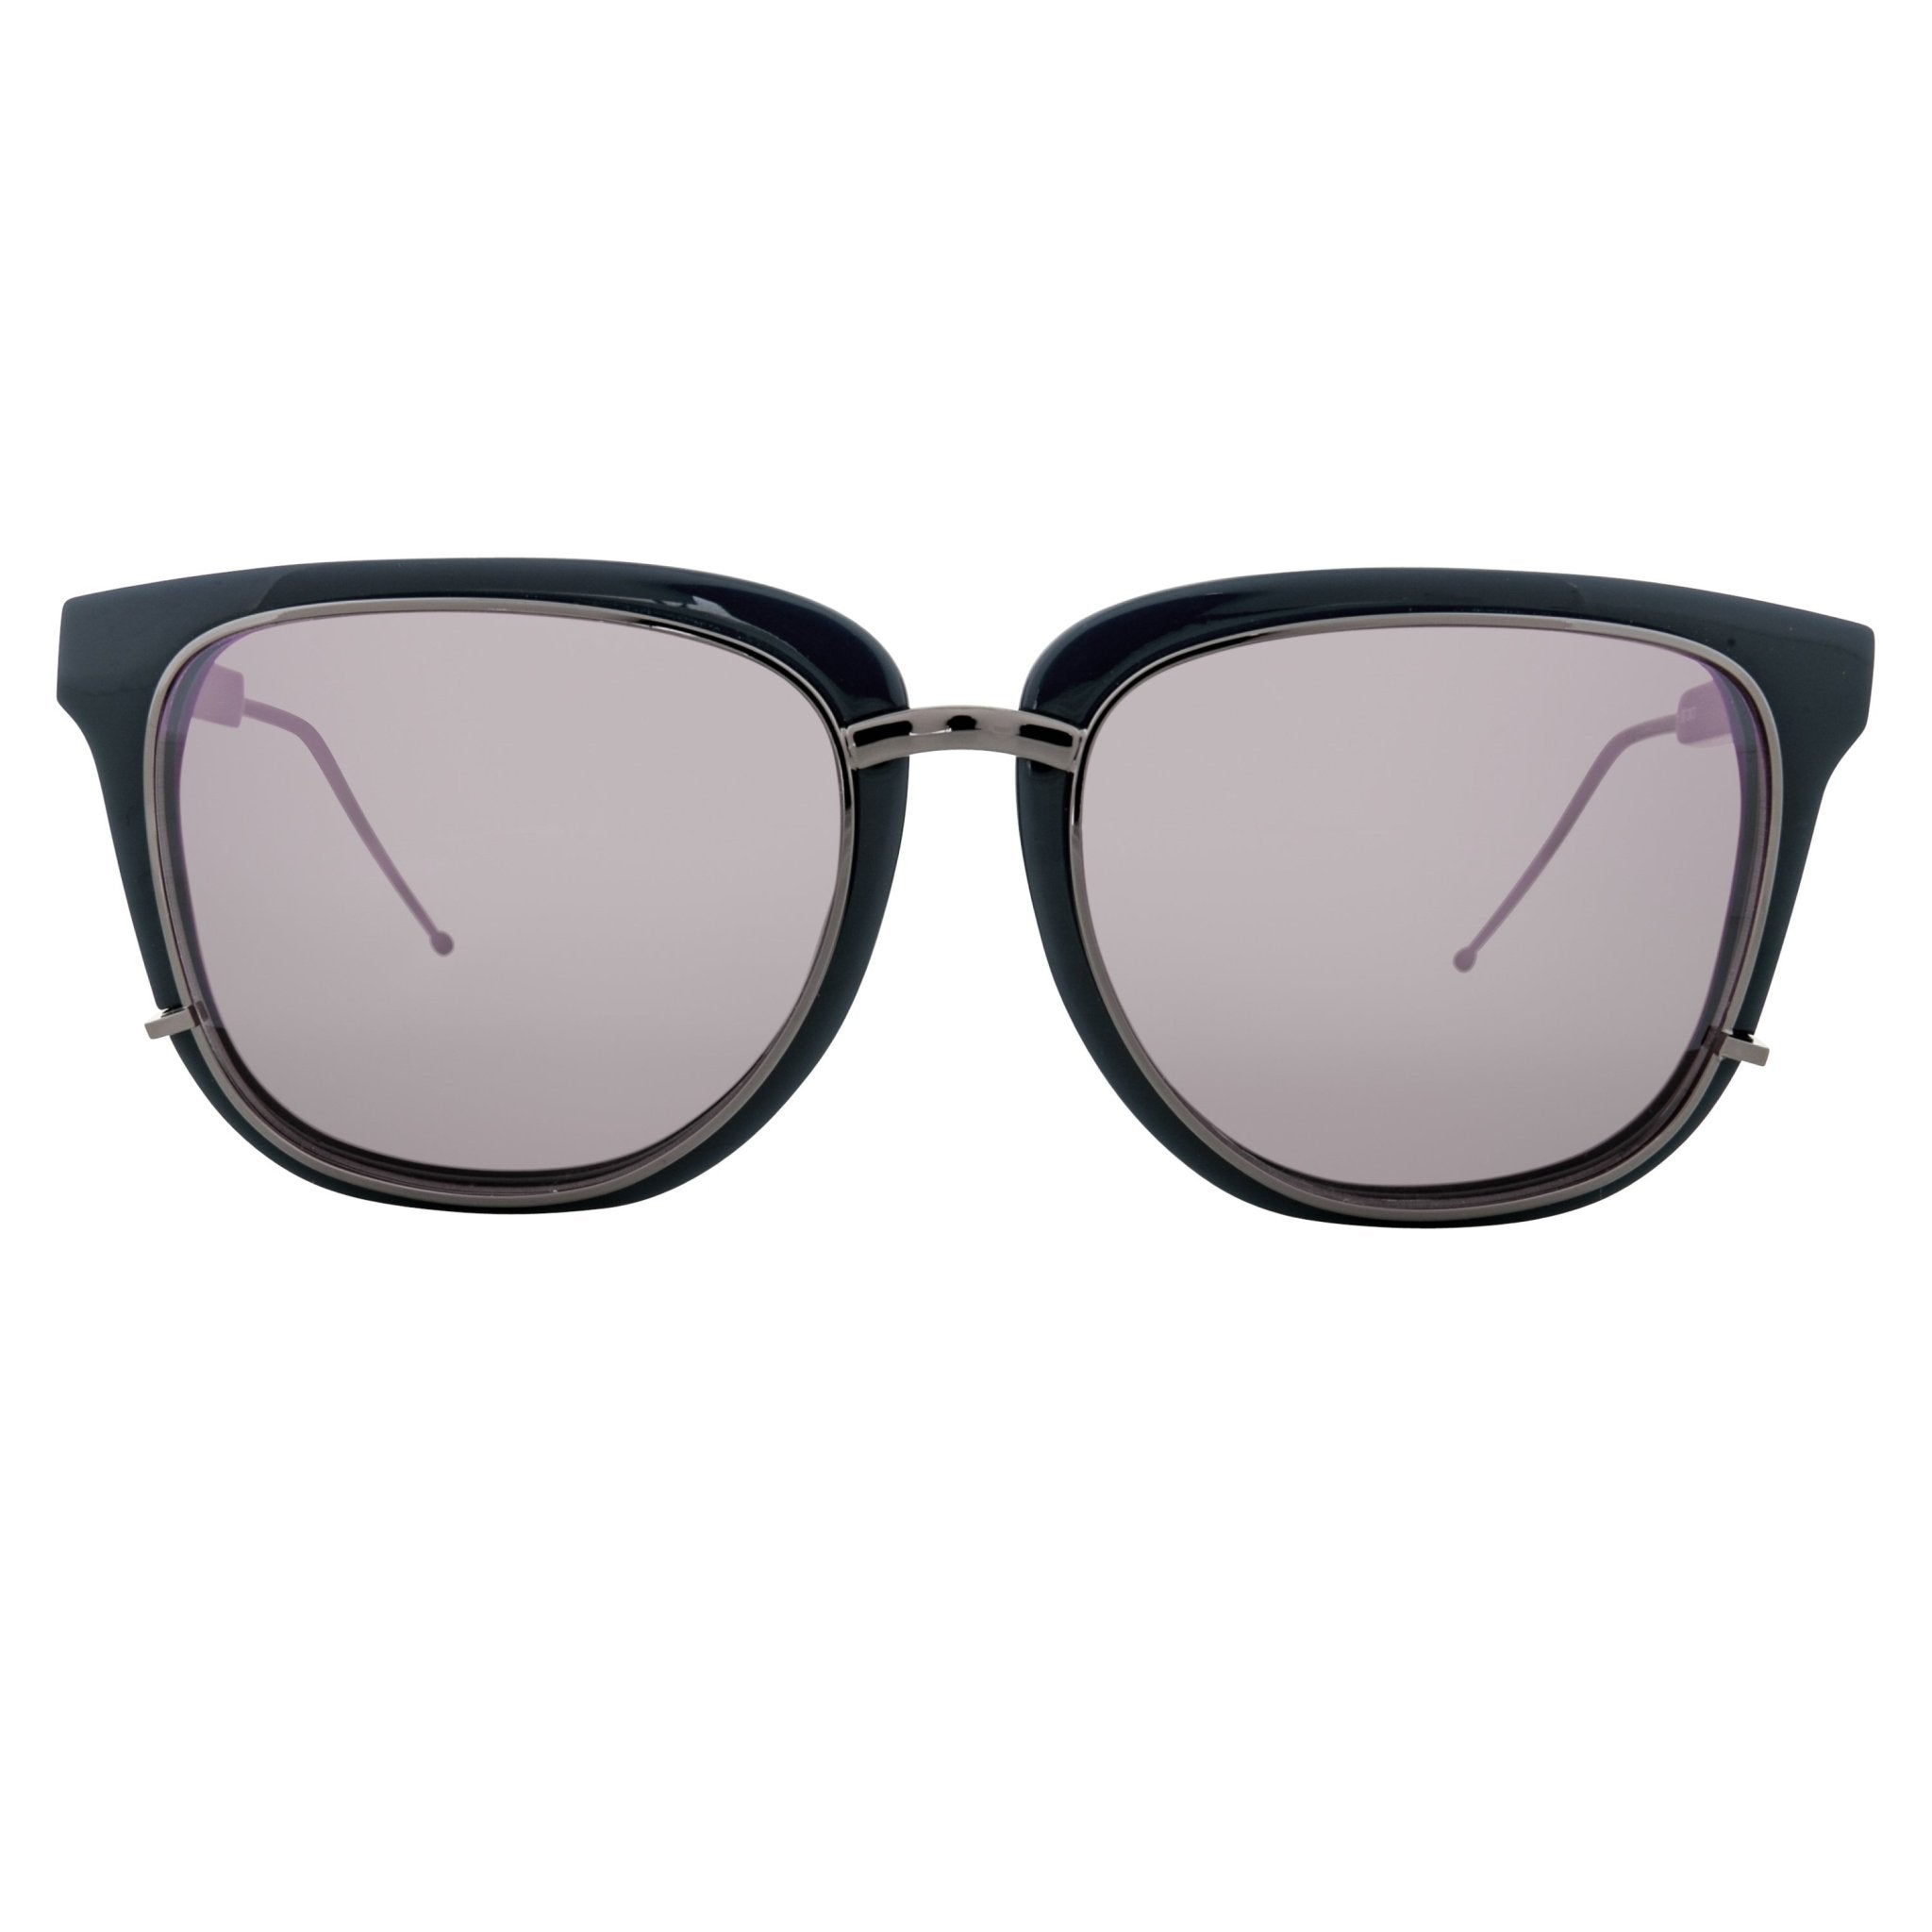 Phillip Lim Sunglasses Navy and Gunmetal D-Frame with Black Mirror to Purple Lenses Category 3 - PL176C4SUN - Watches & Crystals